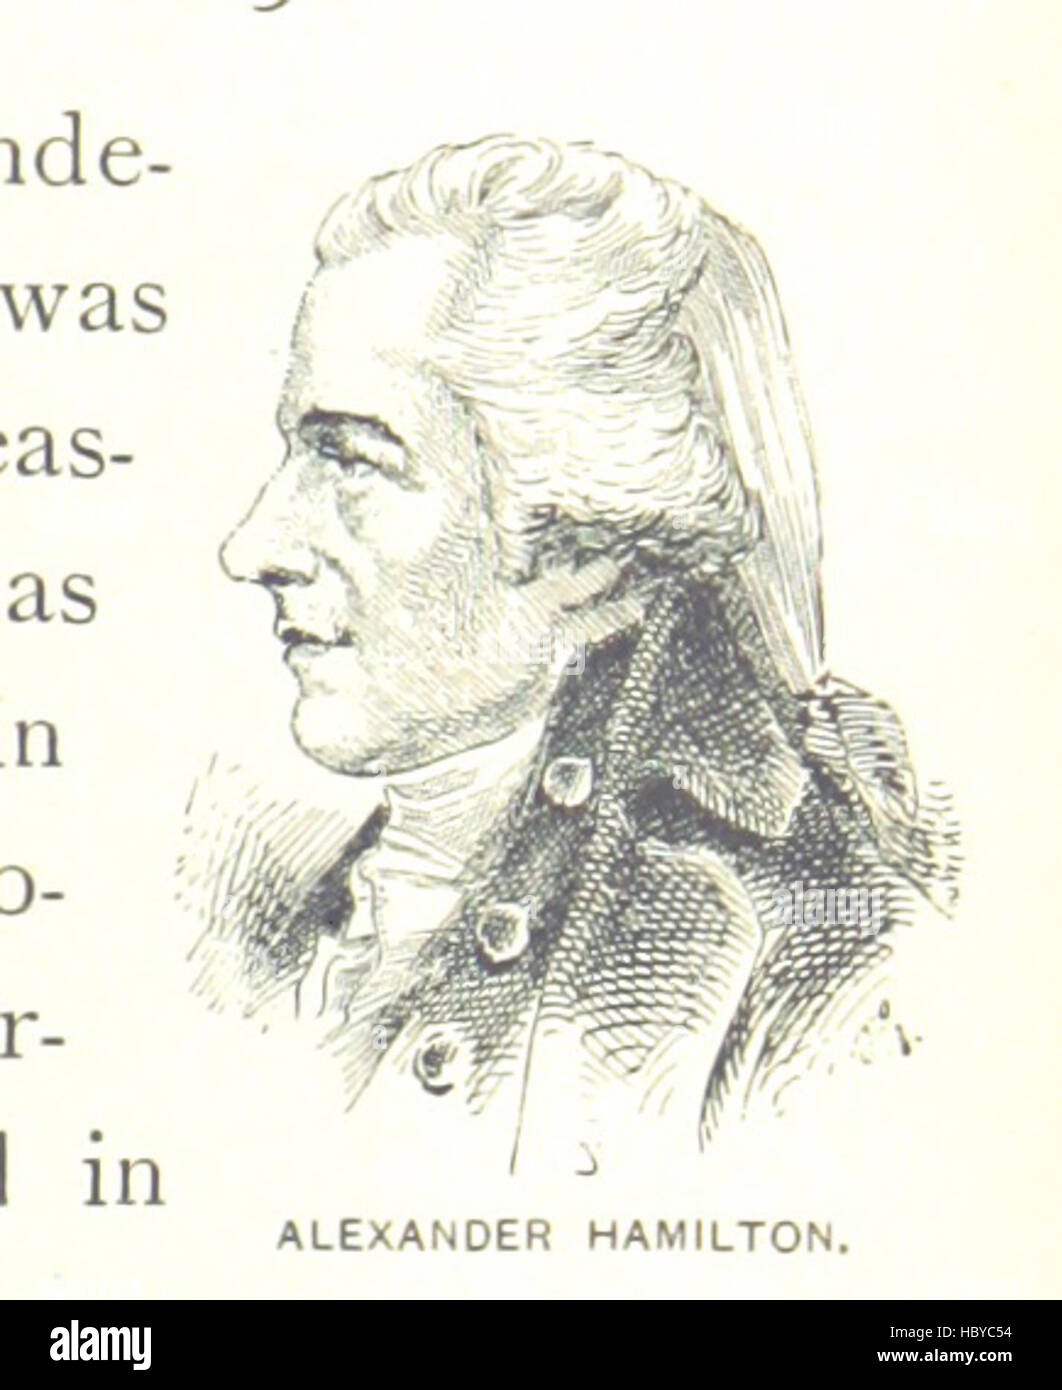 Image taken from page 239 of 'A history of the United States and its people, for the use of Schools' Image taken from page 239 of 'A history of the Stock Photo